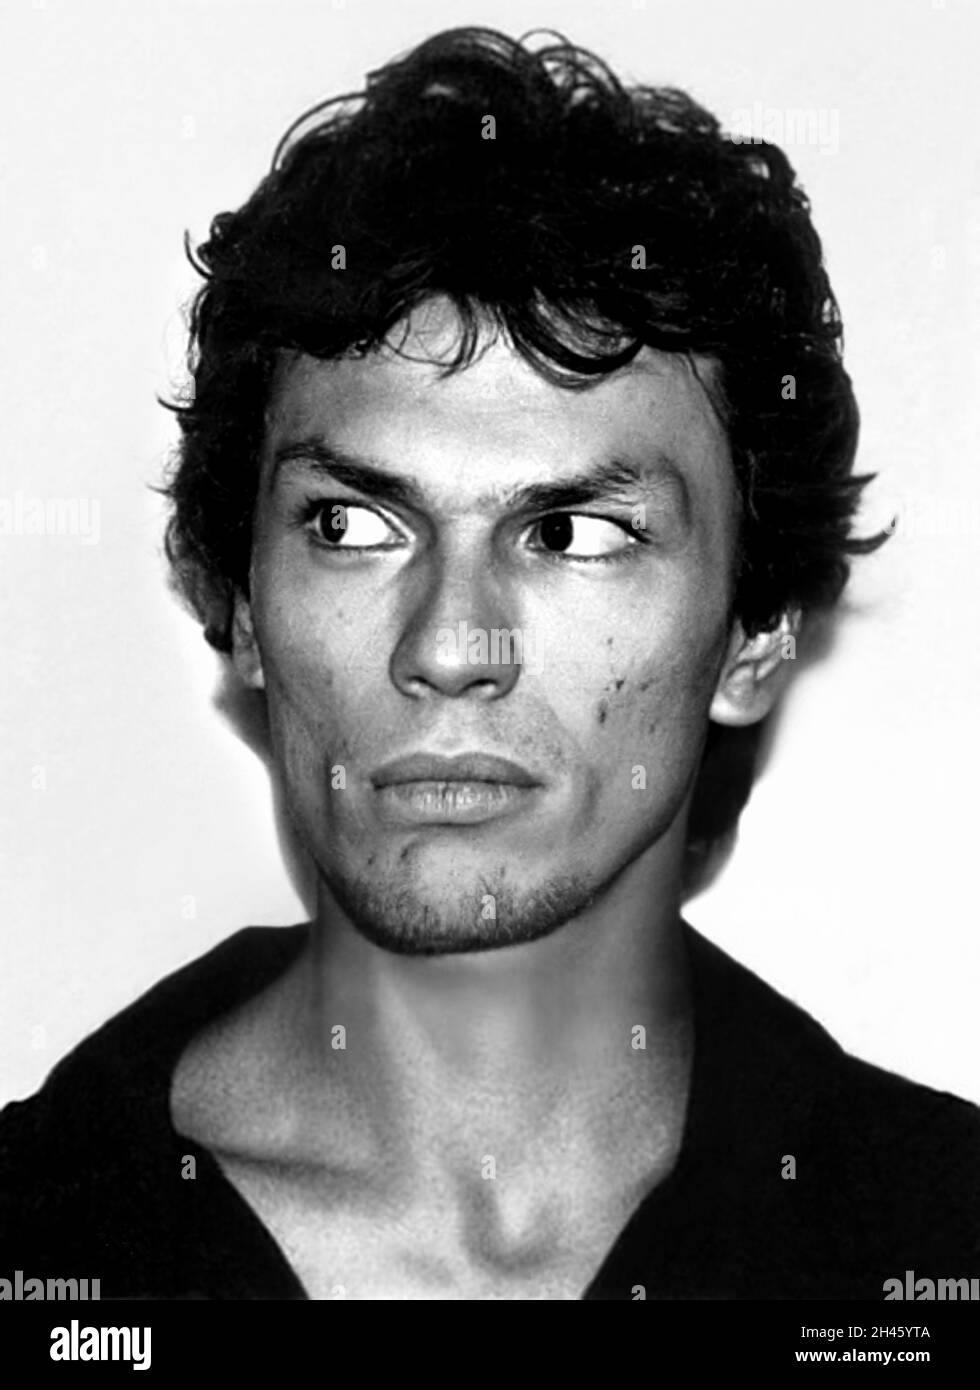 1985 , LOS ANGELES , USA : The Satanist serial killer RICHARD RAMIREZ ( 1960 - 2013 ), born Ricardo Leyva Munoz Ramírez , when was arrested in a mugshot by Los Angeles Police Department . Ramirez ' The Night Stalker ' was  also serial rapist , kidnapper , child molester and burglar , was an American spree killer who murdered at least 13 people , from 17 march to 31 august 1985  . Unknown photographer .- MUG SHOT - MUG-SHOT - SERIAL KILLER  - portrait - ritratto - serial-killer - assassino seriale - CRONACA NERA - criminale - criminal - SERIAL KILLER  - foto segnaletica della Polizia - SATANISM Stock Photo